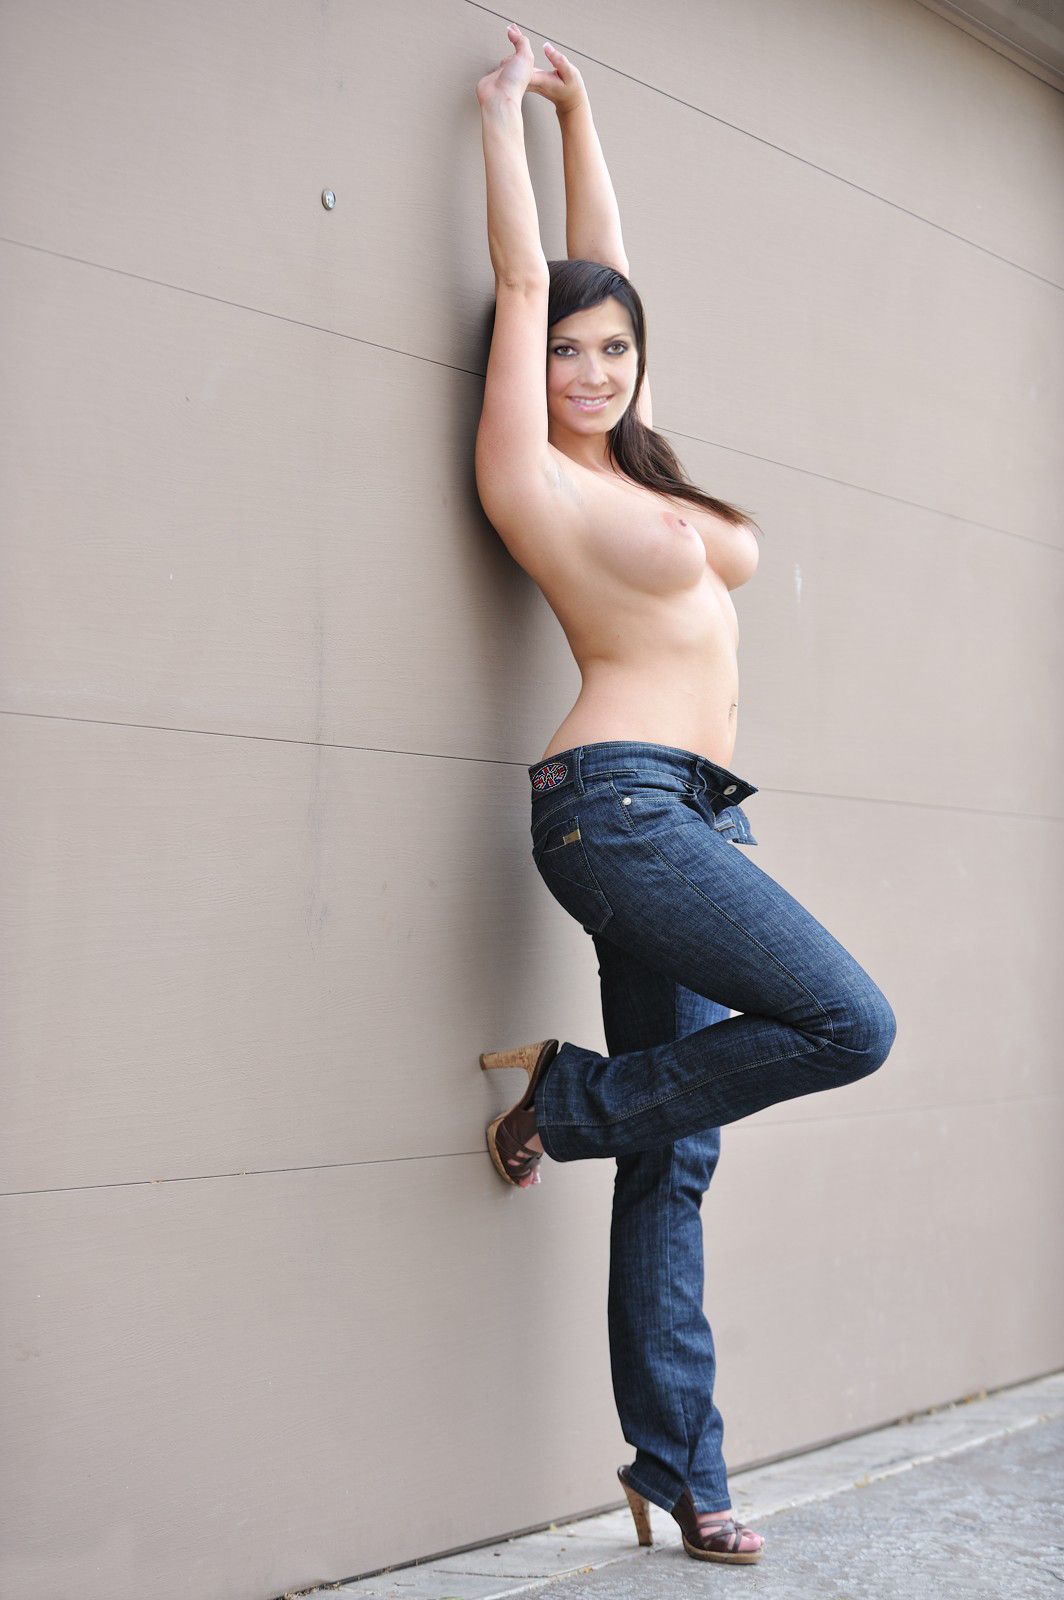 Topless Girl In Jeans